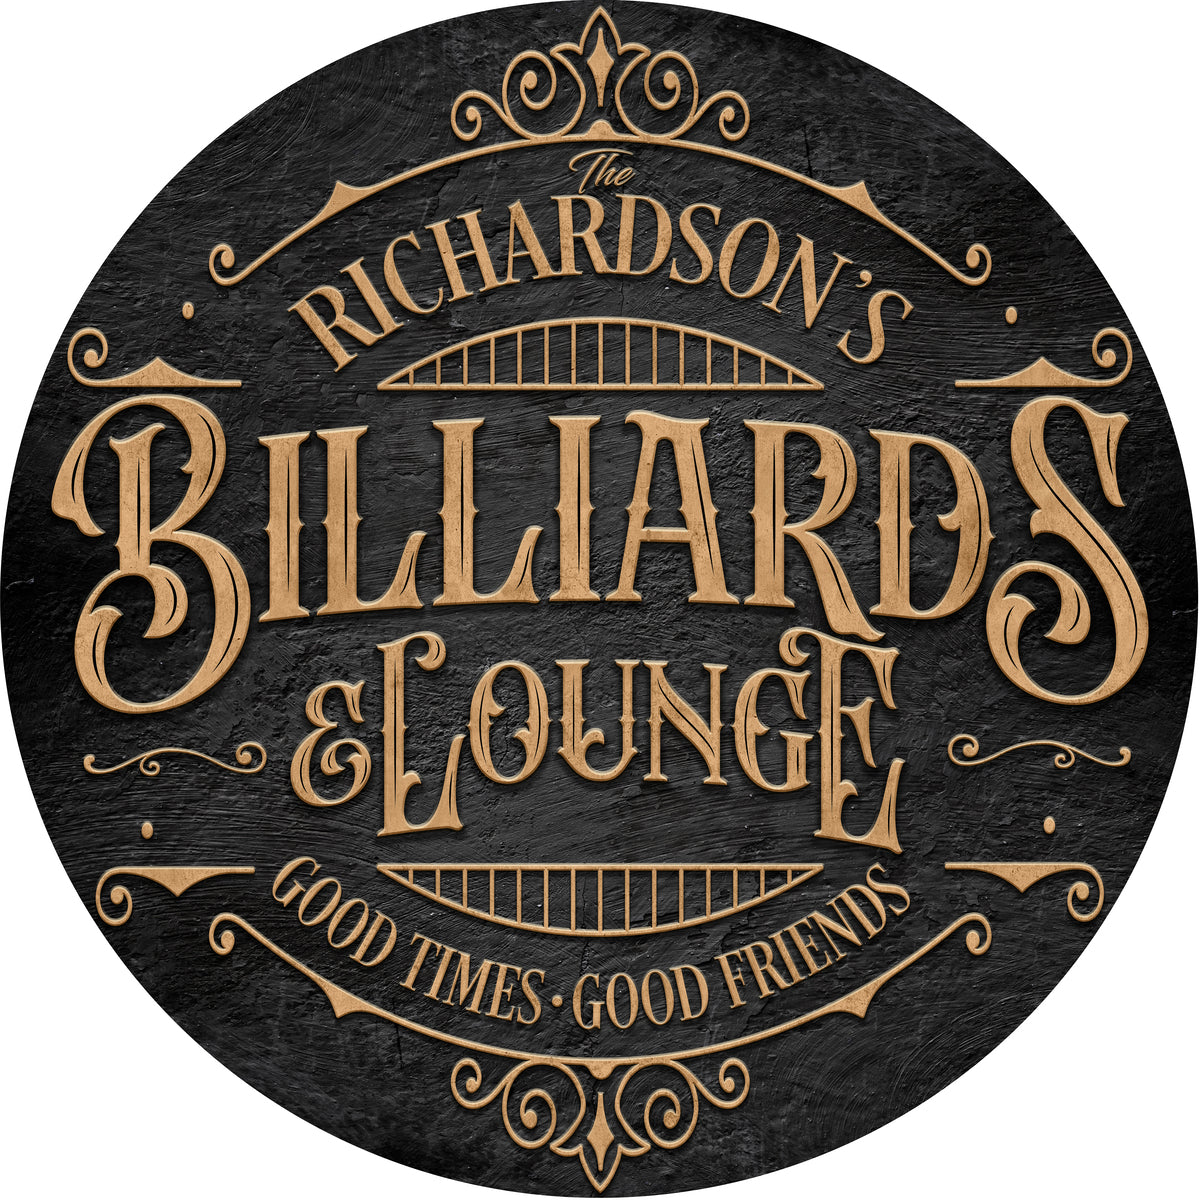 Billiards Sign/Pool hall sign in black metal circle with the words [family name] Billiards & Lounge, good times good friends